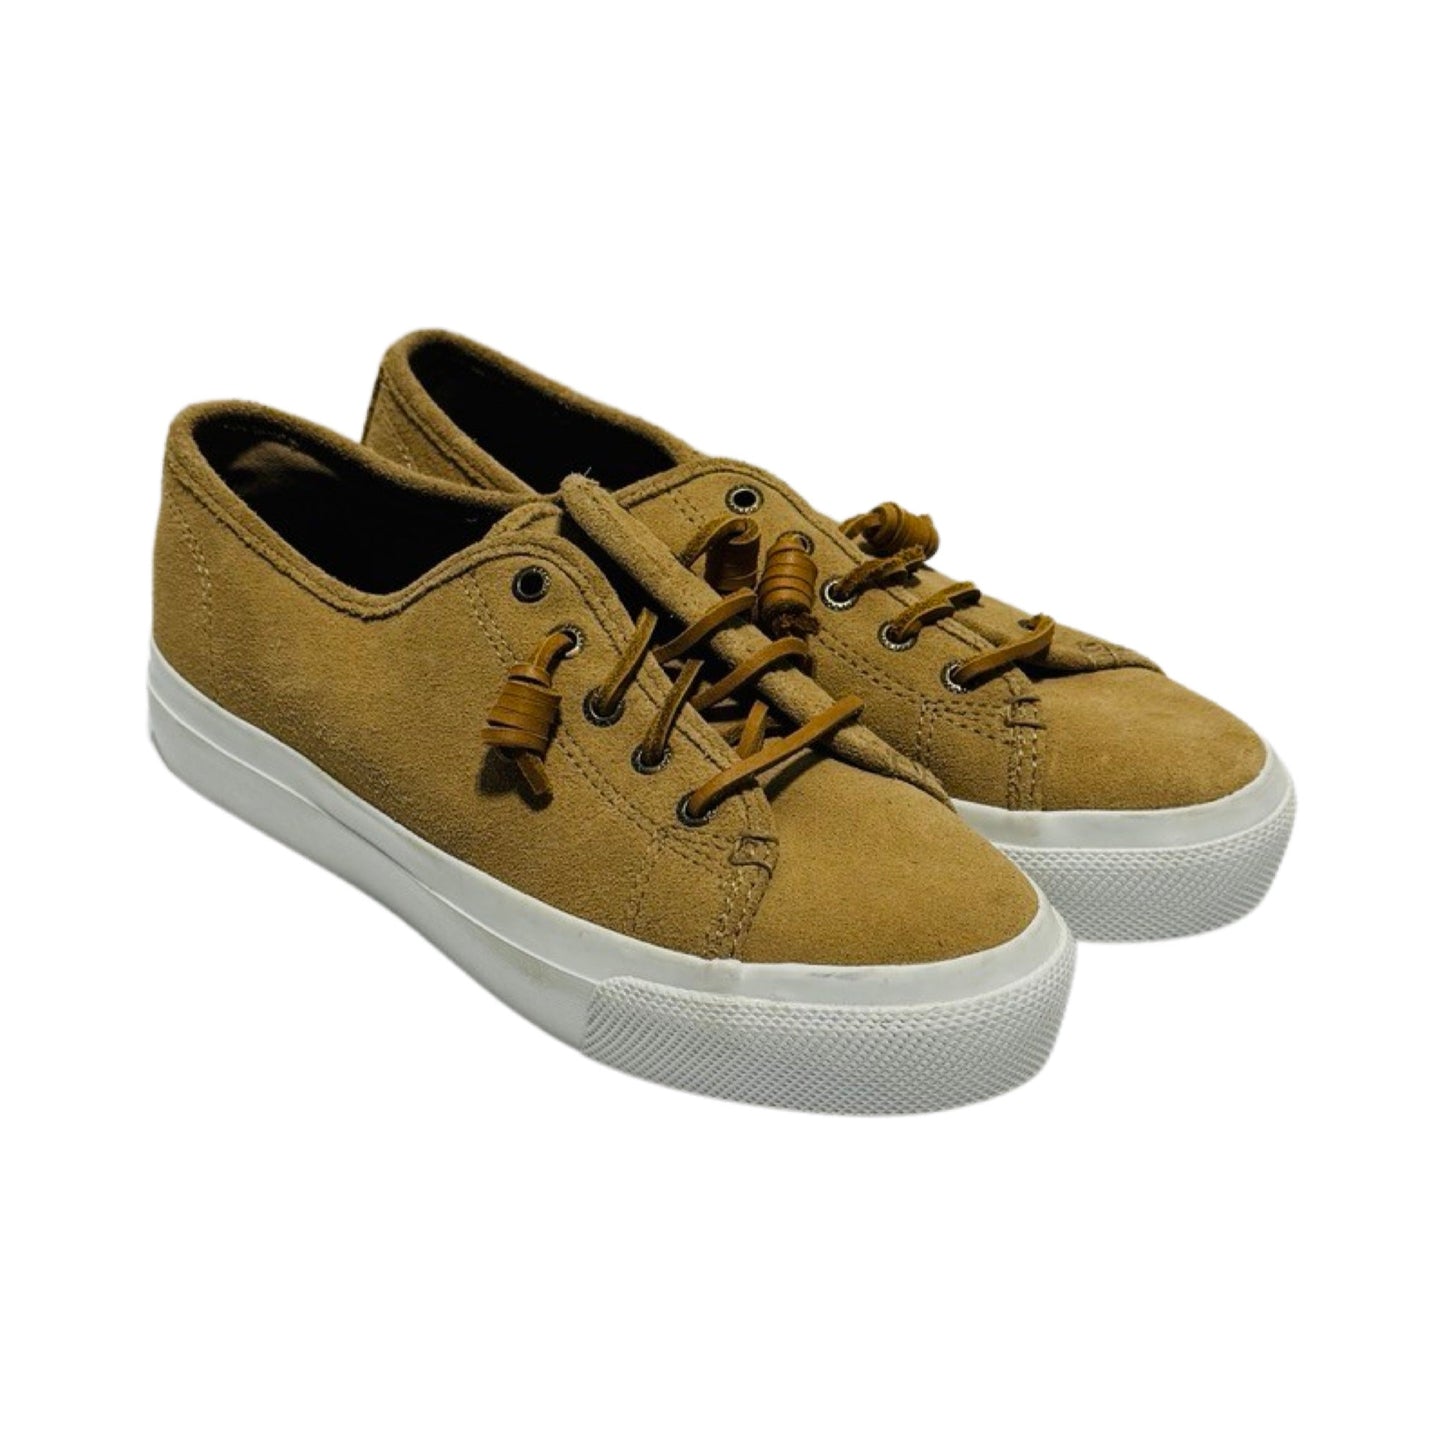 Crest Vibe Tan Suede Top Slider Shoes Sneakers By Sperry  Size: 7.5